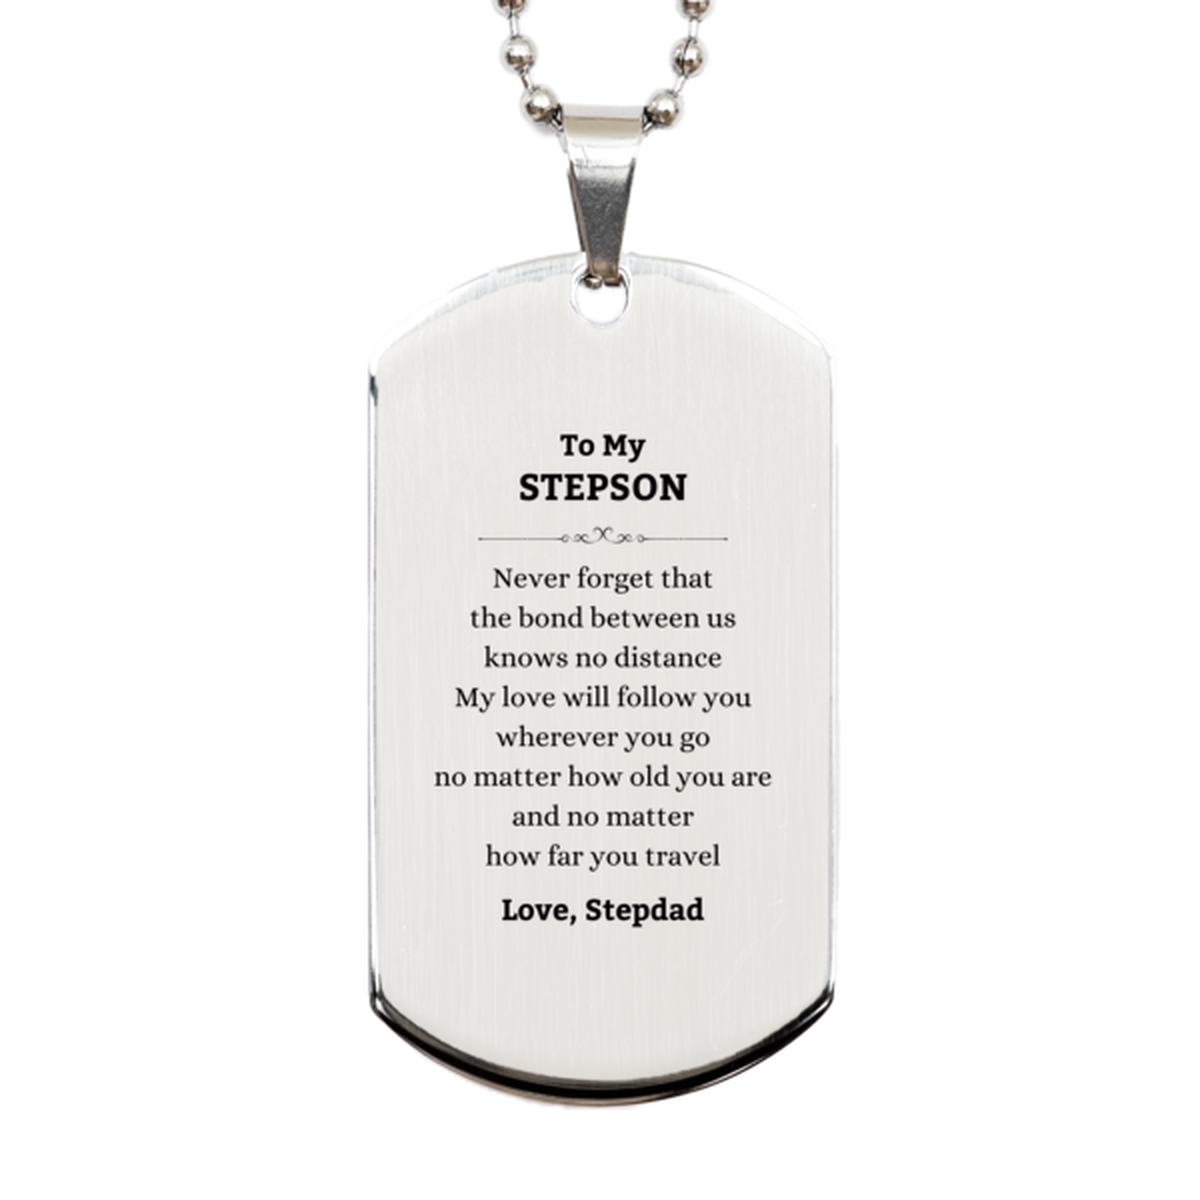 Stepson Birthday Gifts from Stepdad, Adjustable Silver Dog Tag for Stepson Christmas Graduation Unique Gifts Stepson Never forget that the bond between us knows no distance. Love, Stepdad